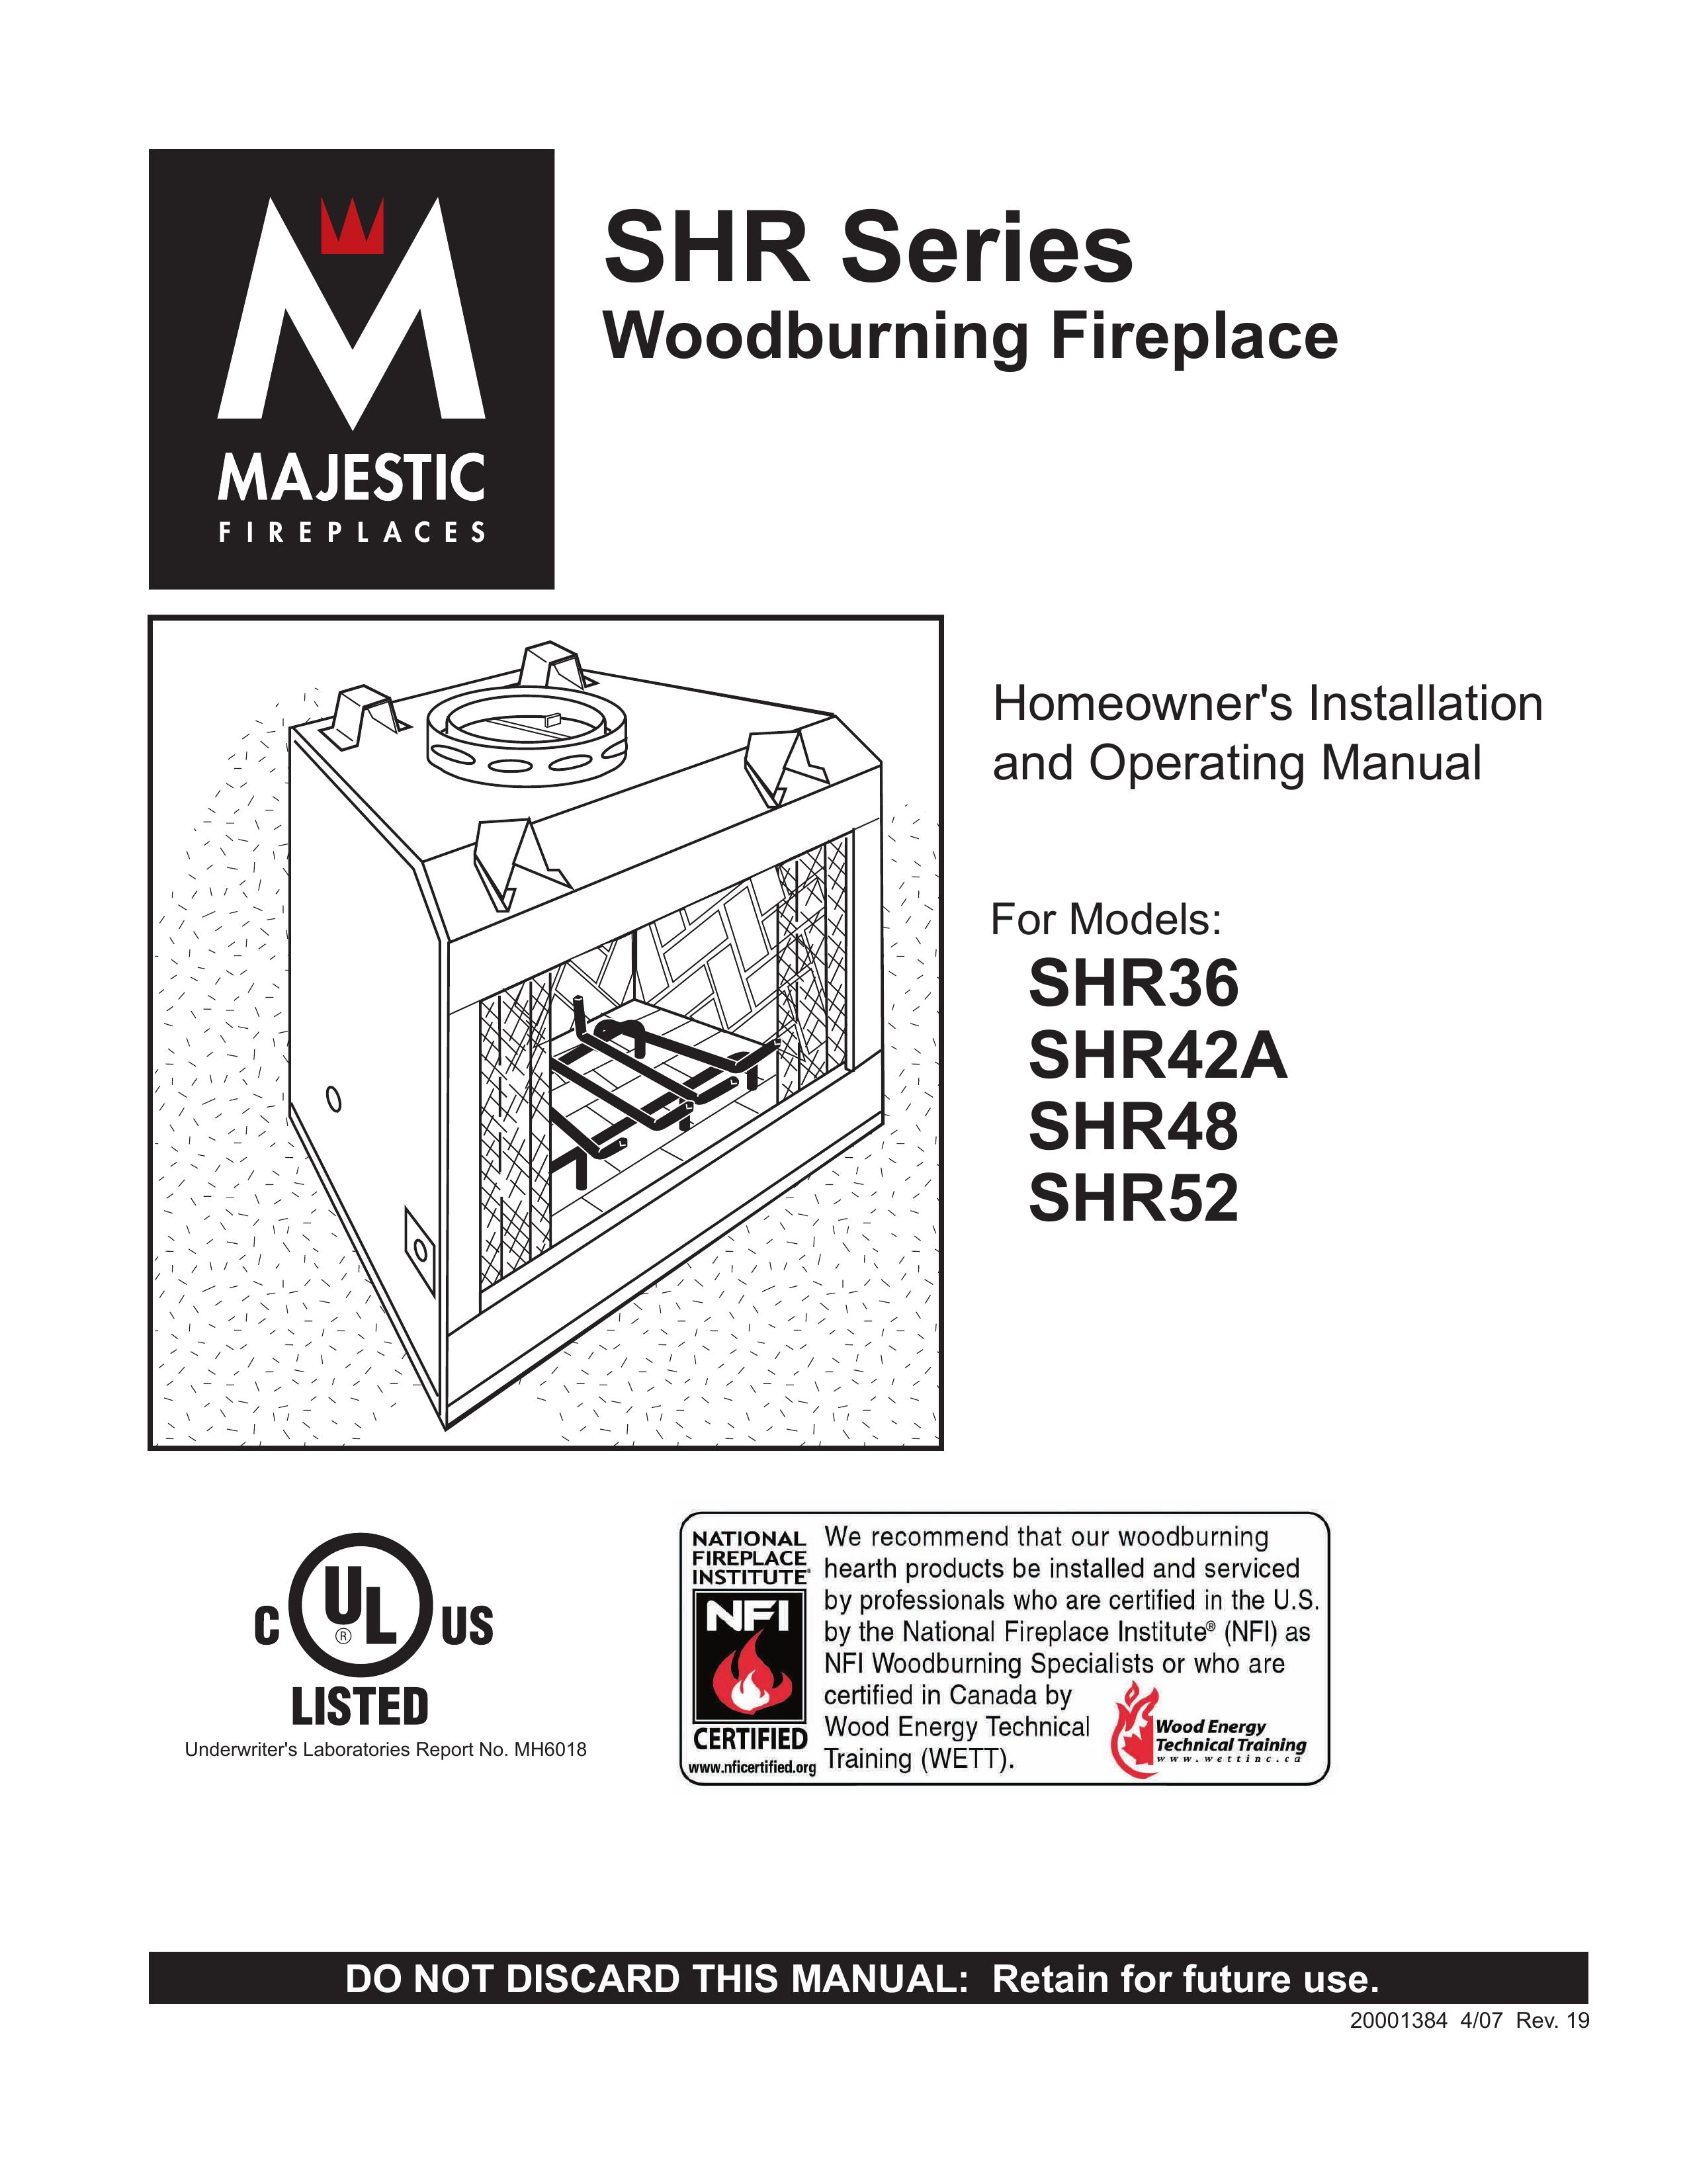 CFM Corporation SHR52 Outdoor Fireplace User Manual (Page 1)